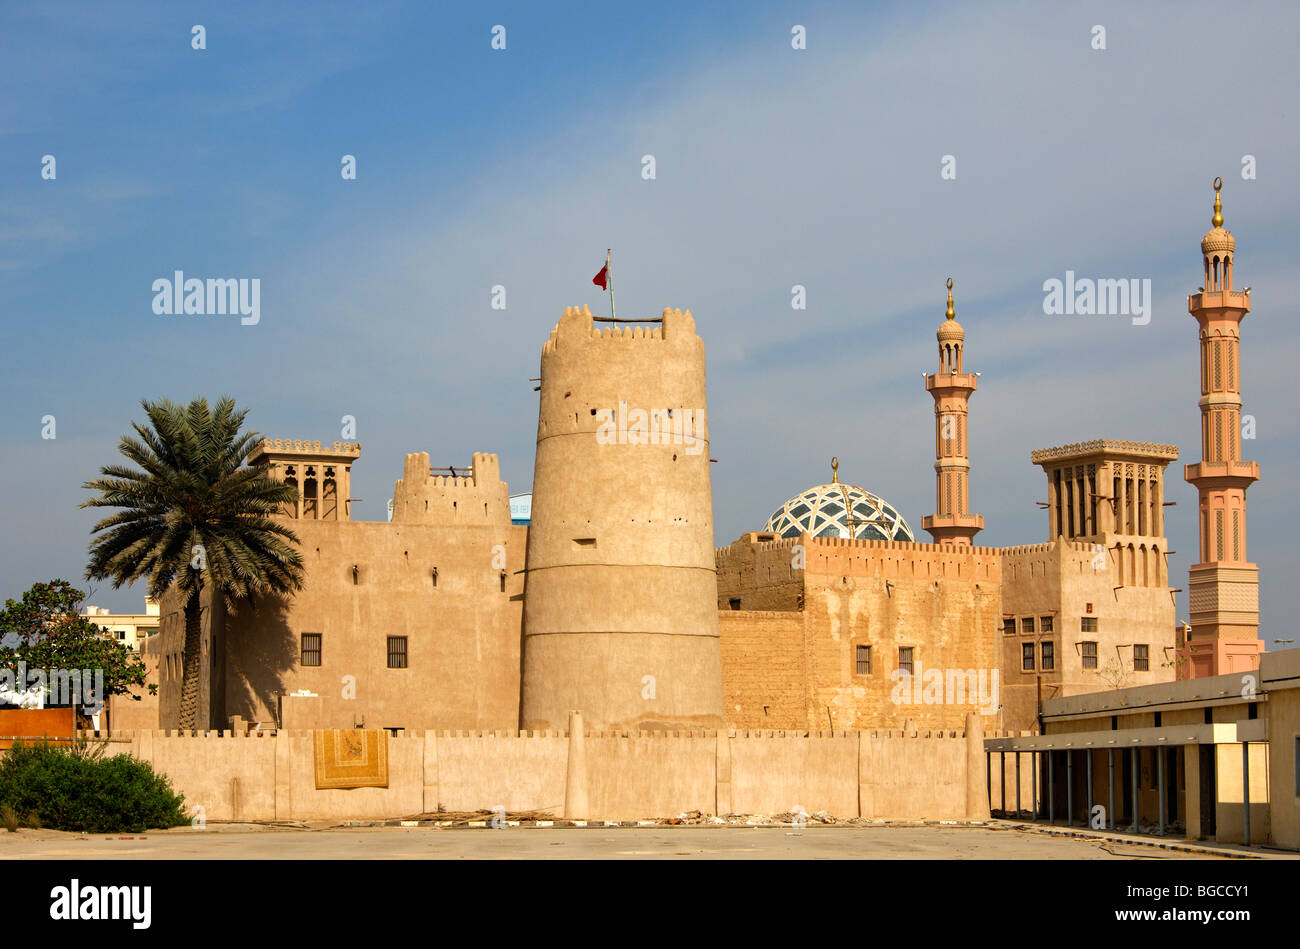 Historical centre of an Arab town with watchtower, wind tower, minarets and dome of a mosque, Ajman, United Arab Emirates Stock Photo